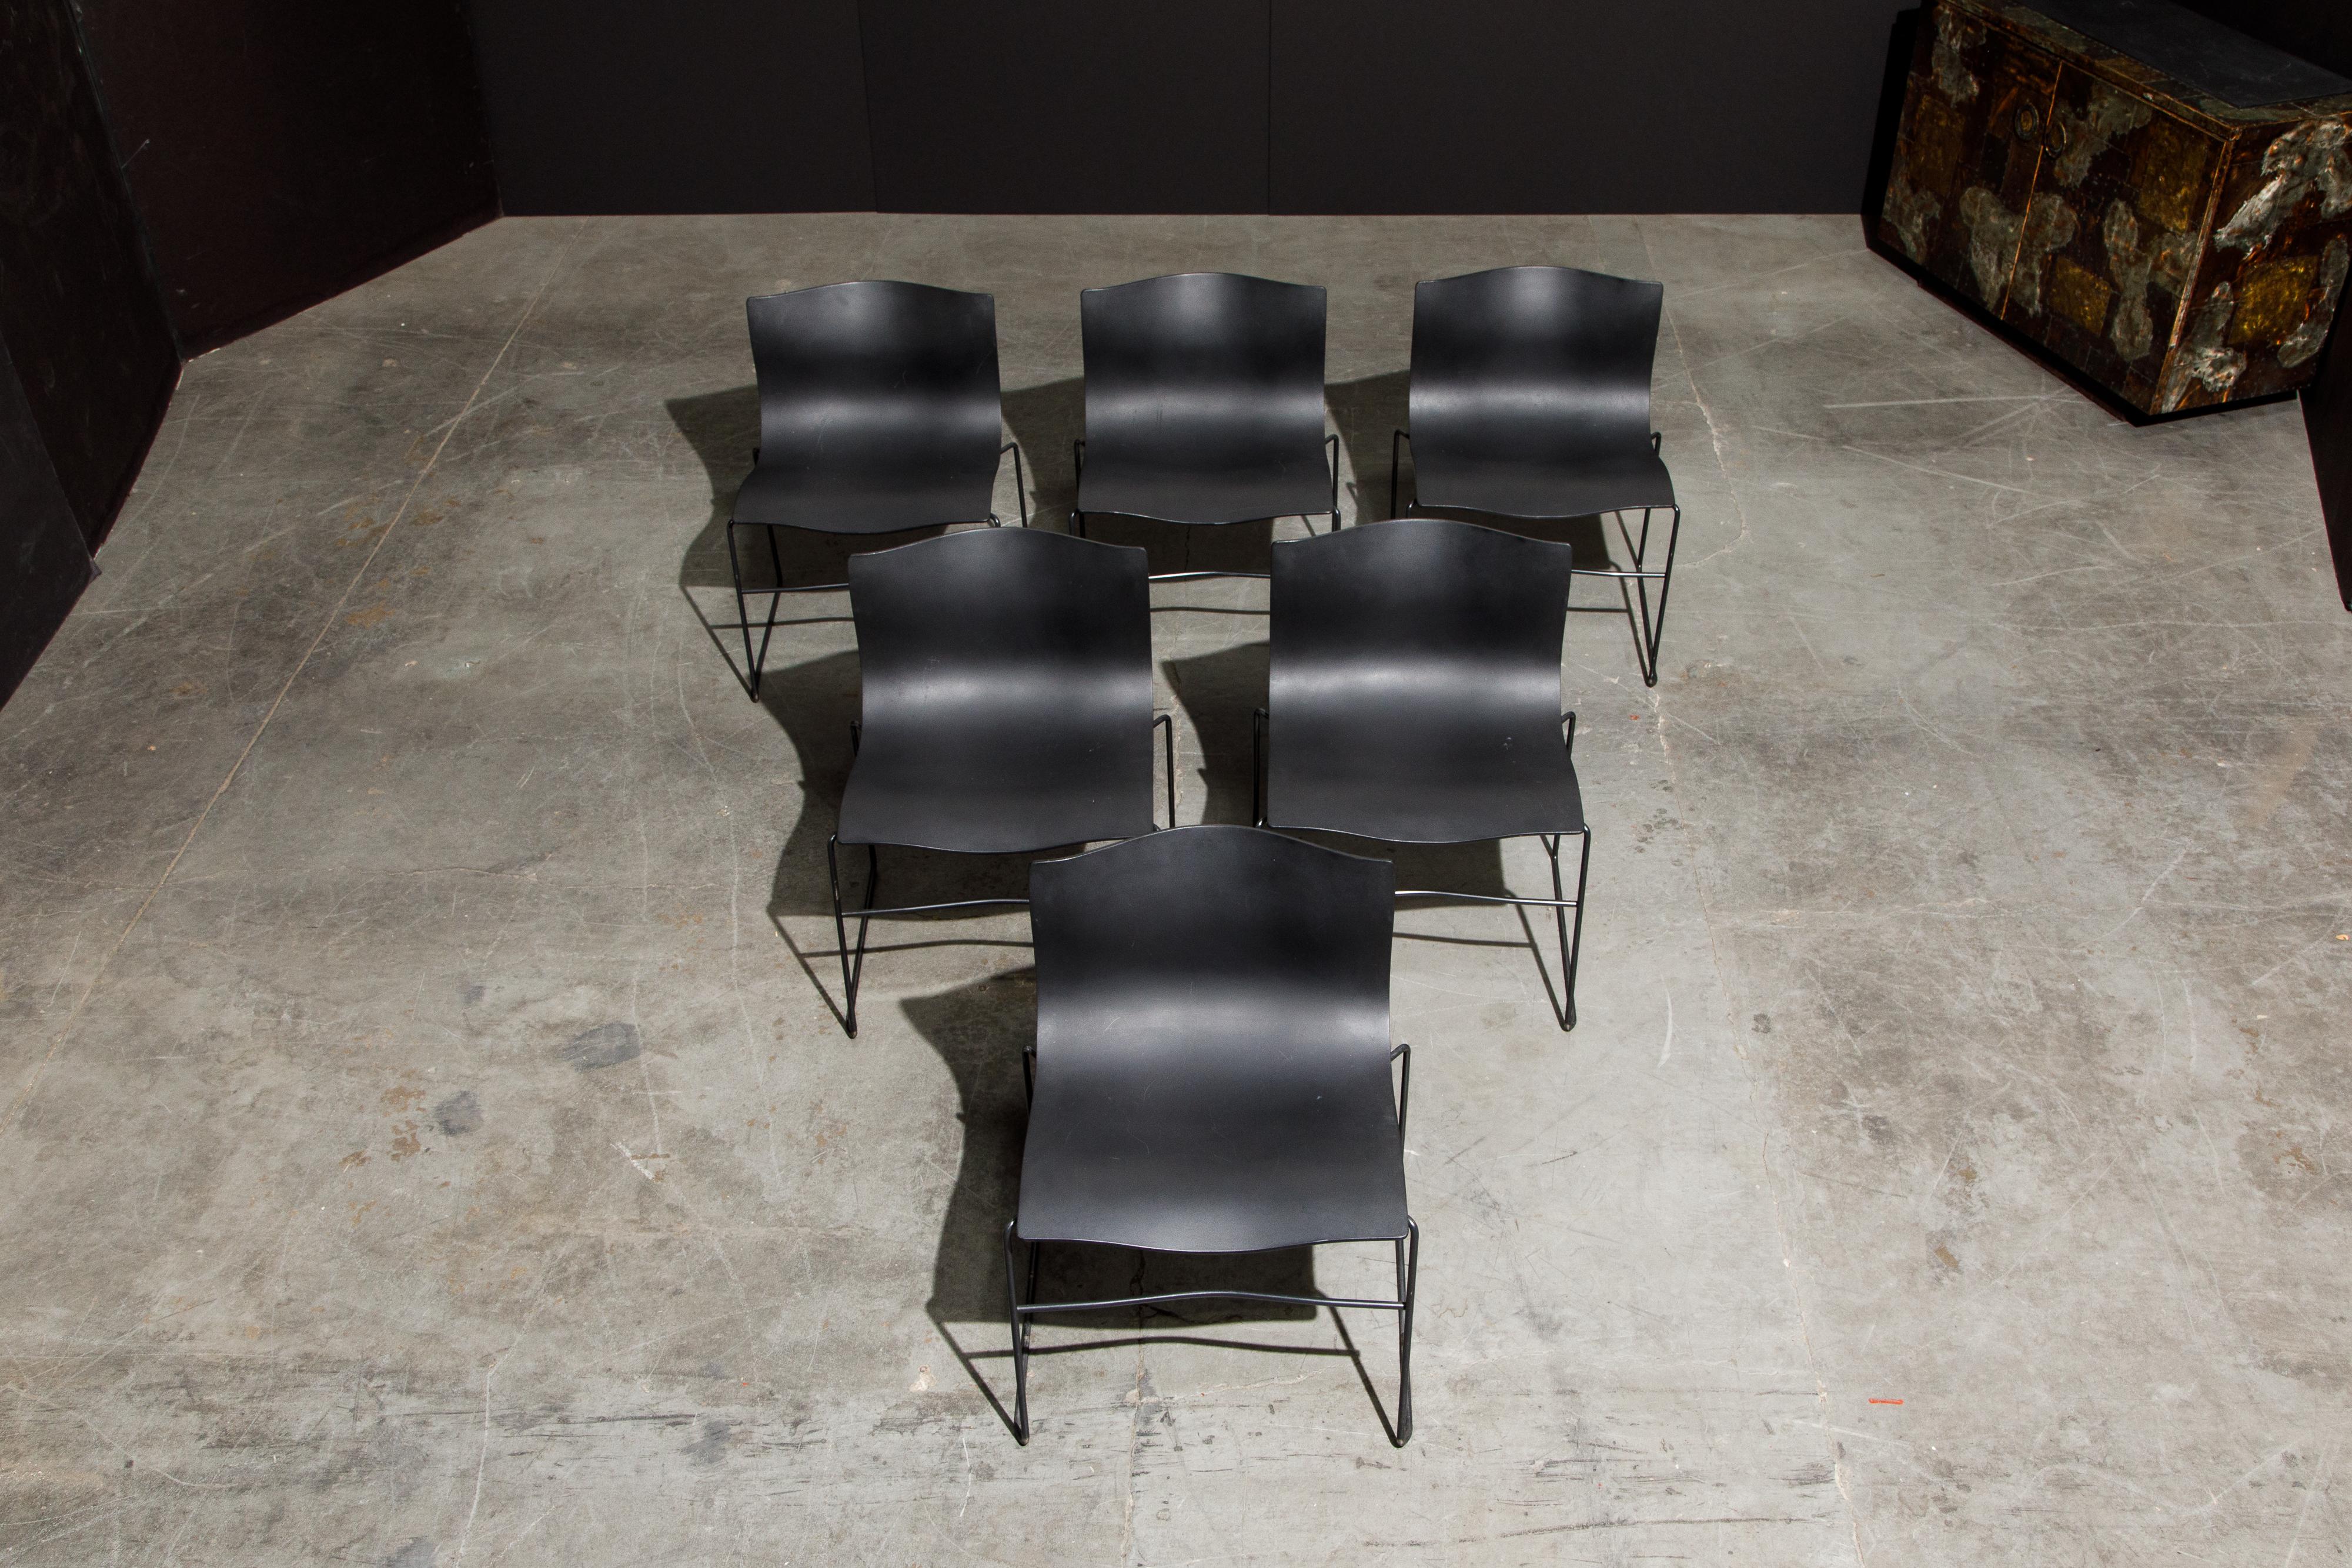 Massimo Vignelli for Knoll Intl 'Handkerchief' Chairs, Signed, Set of Twelve For Sale 5